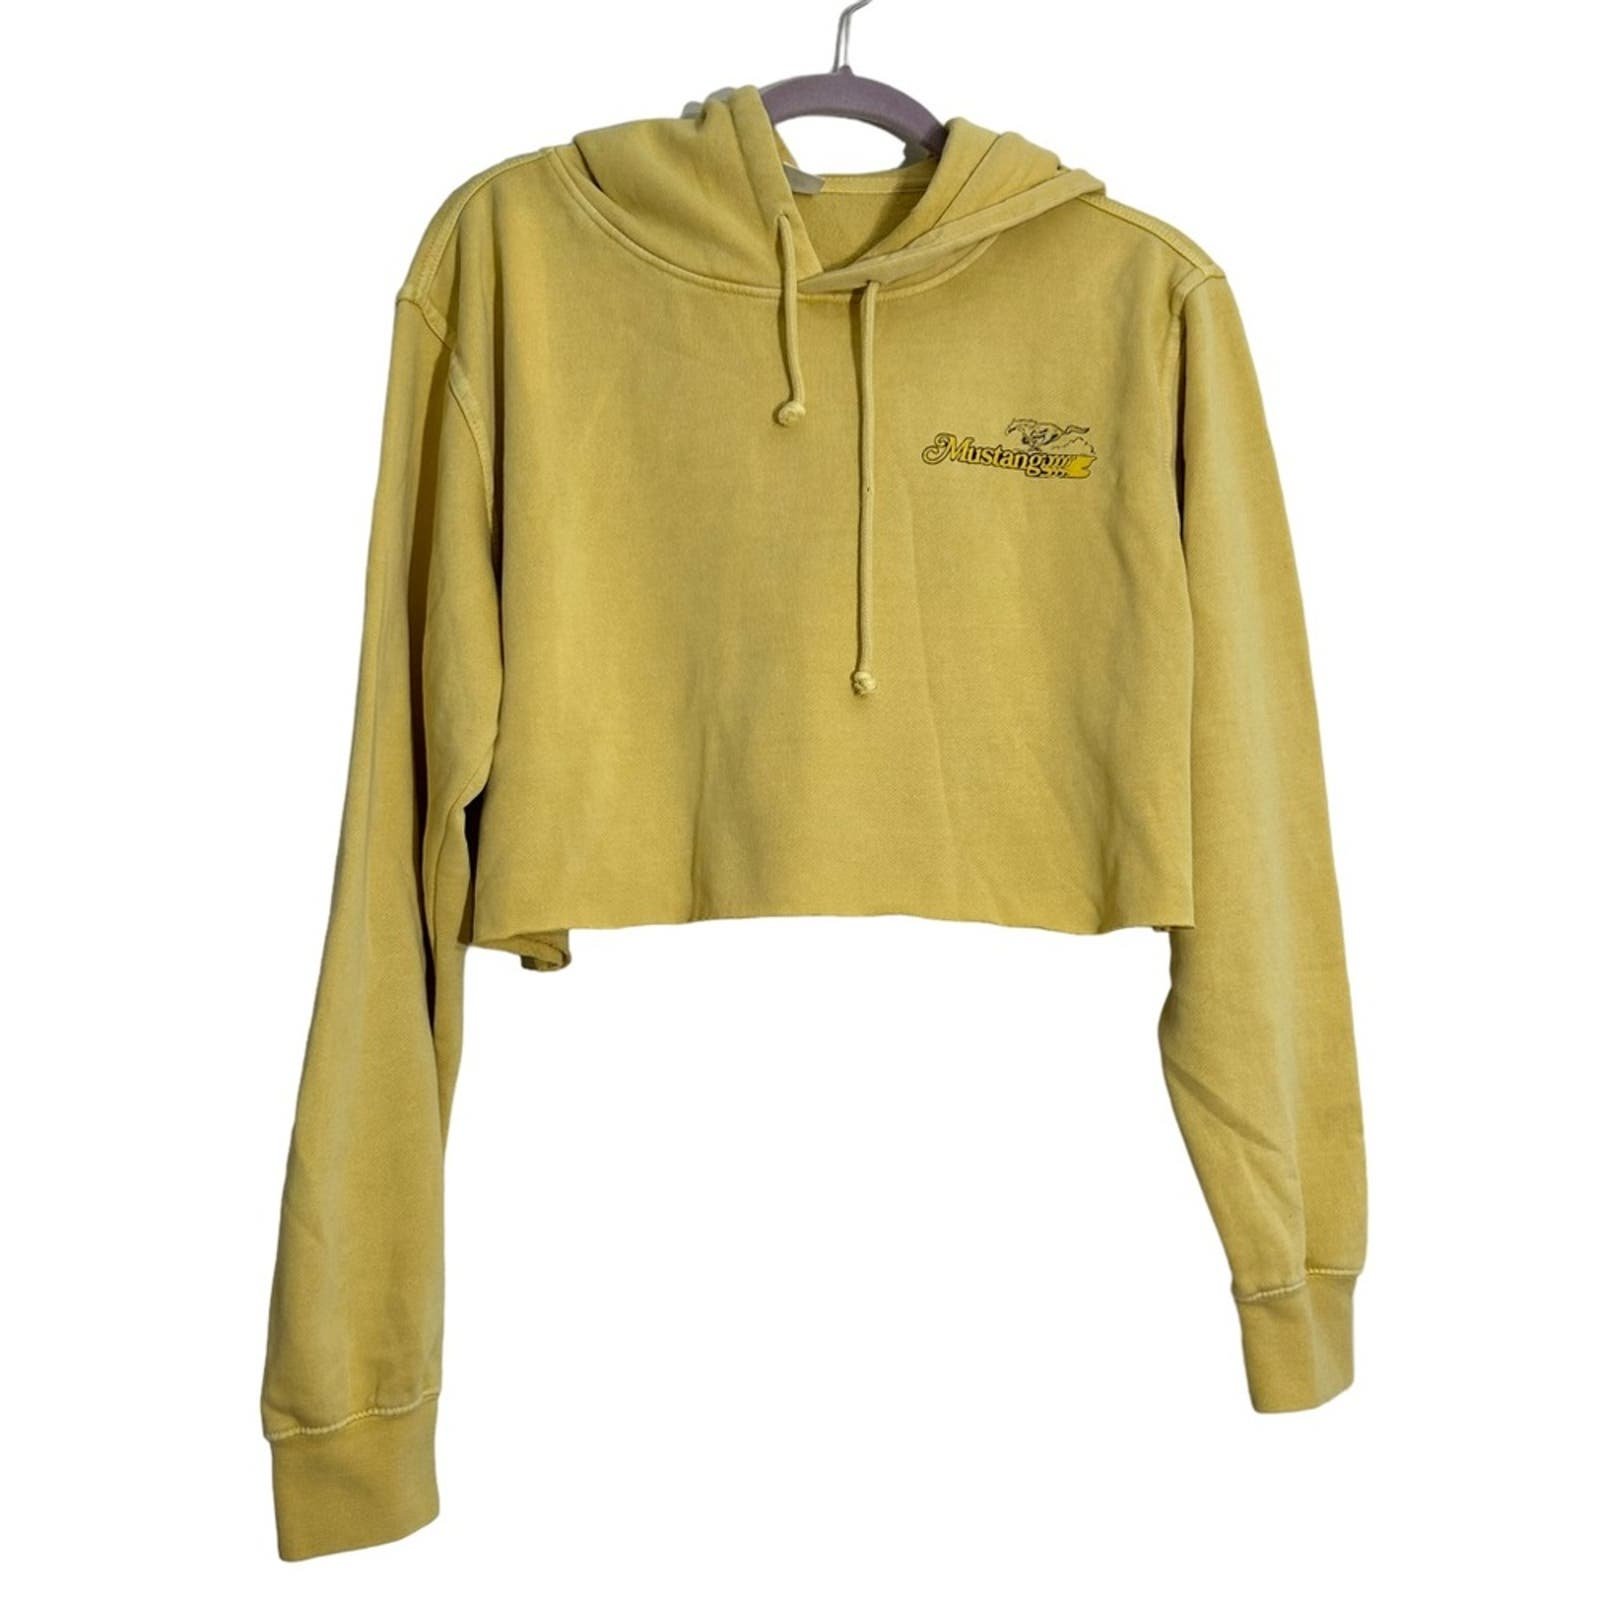 Cheap NWOT Re/Done Upcycle Yellow Cropped Ford Mustang Hoodie Sweatshirt XS/Small nmDtAVViI Discount